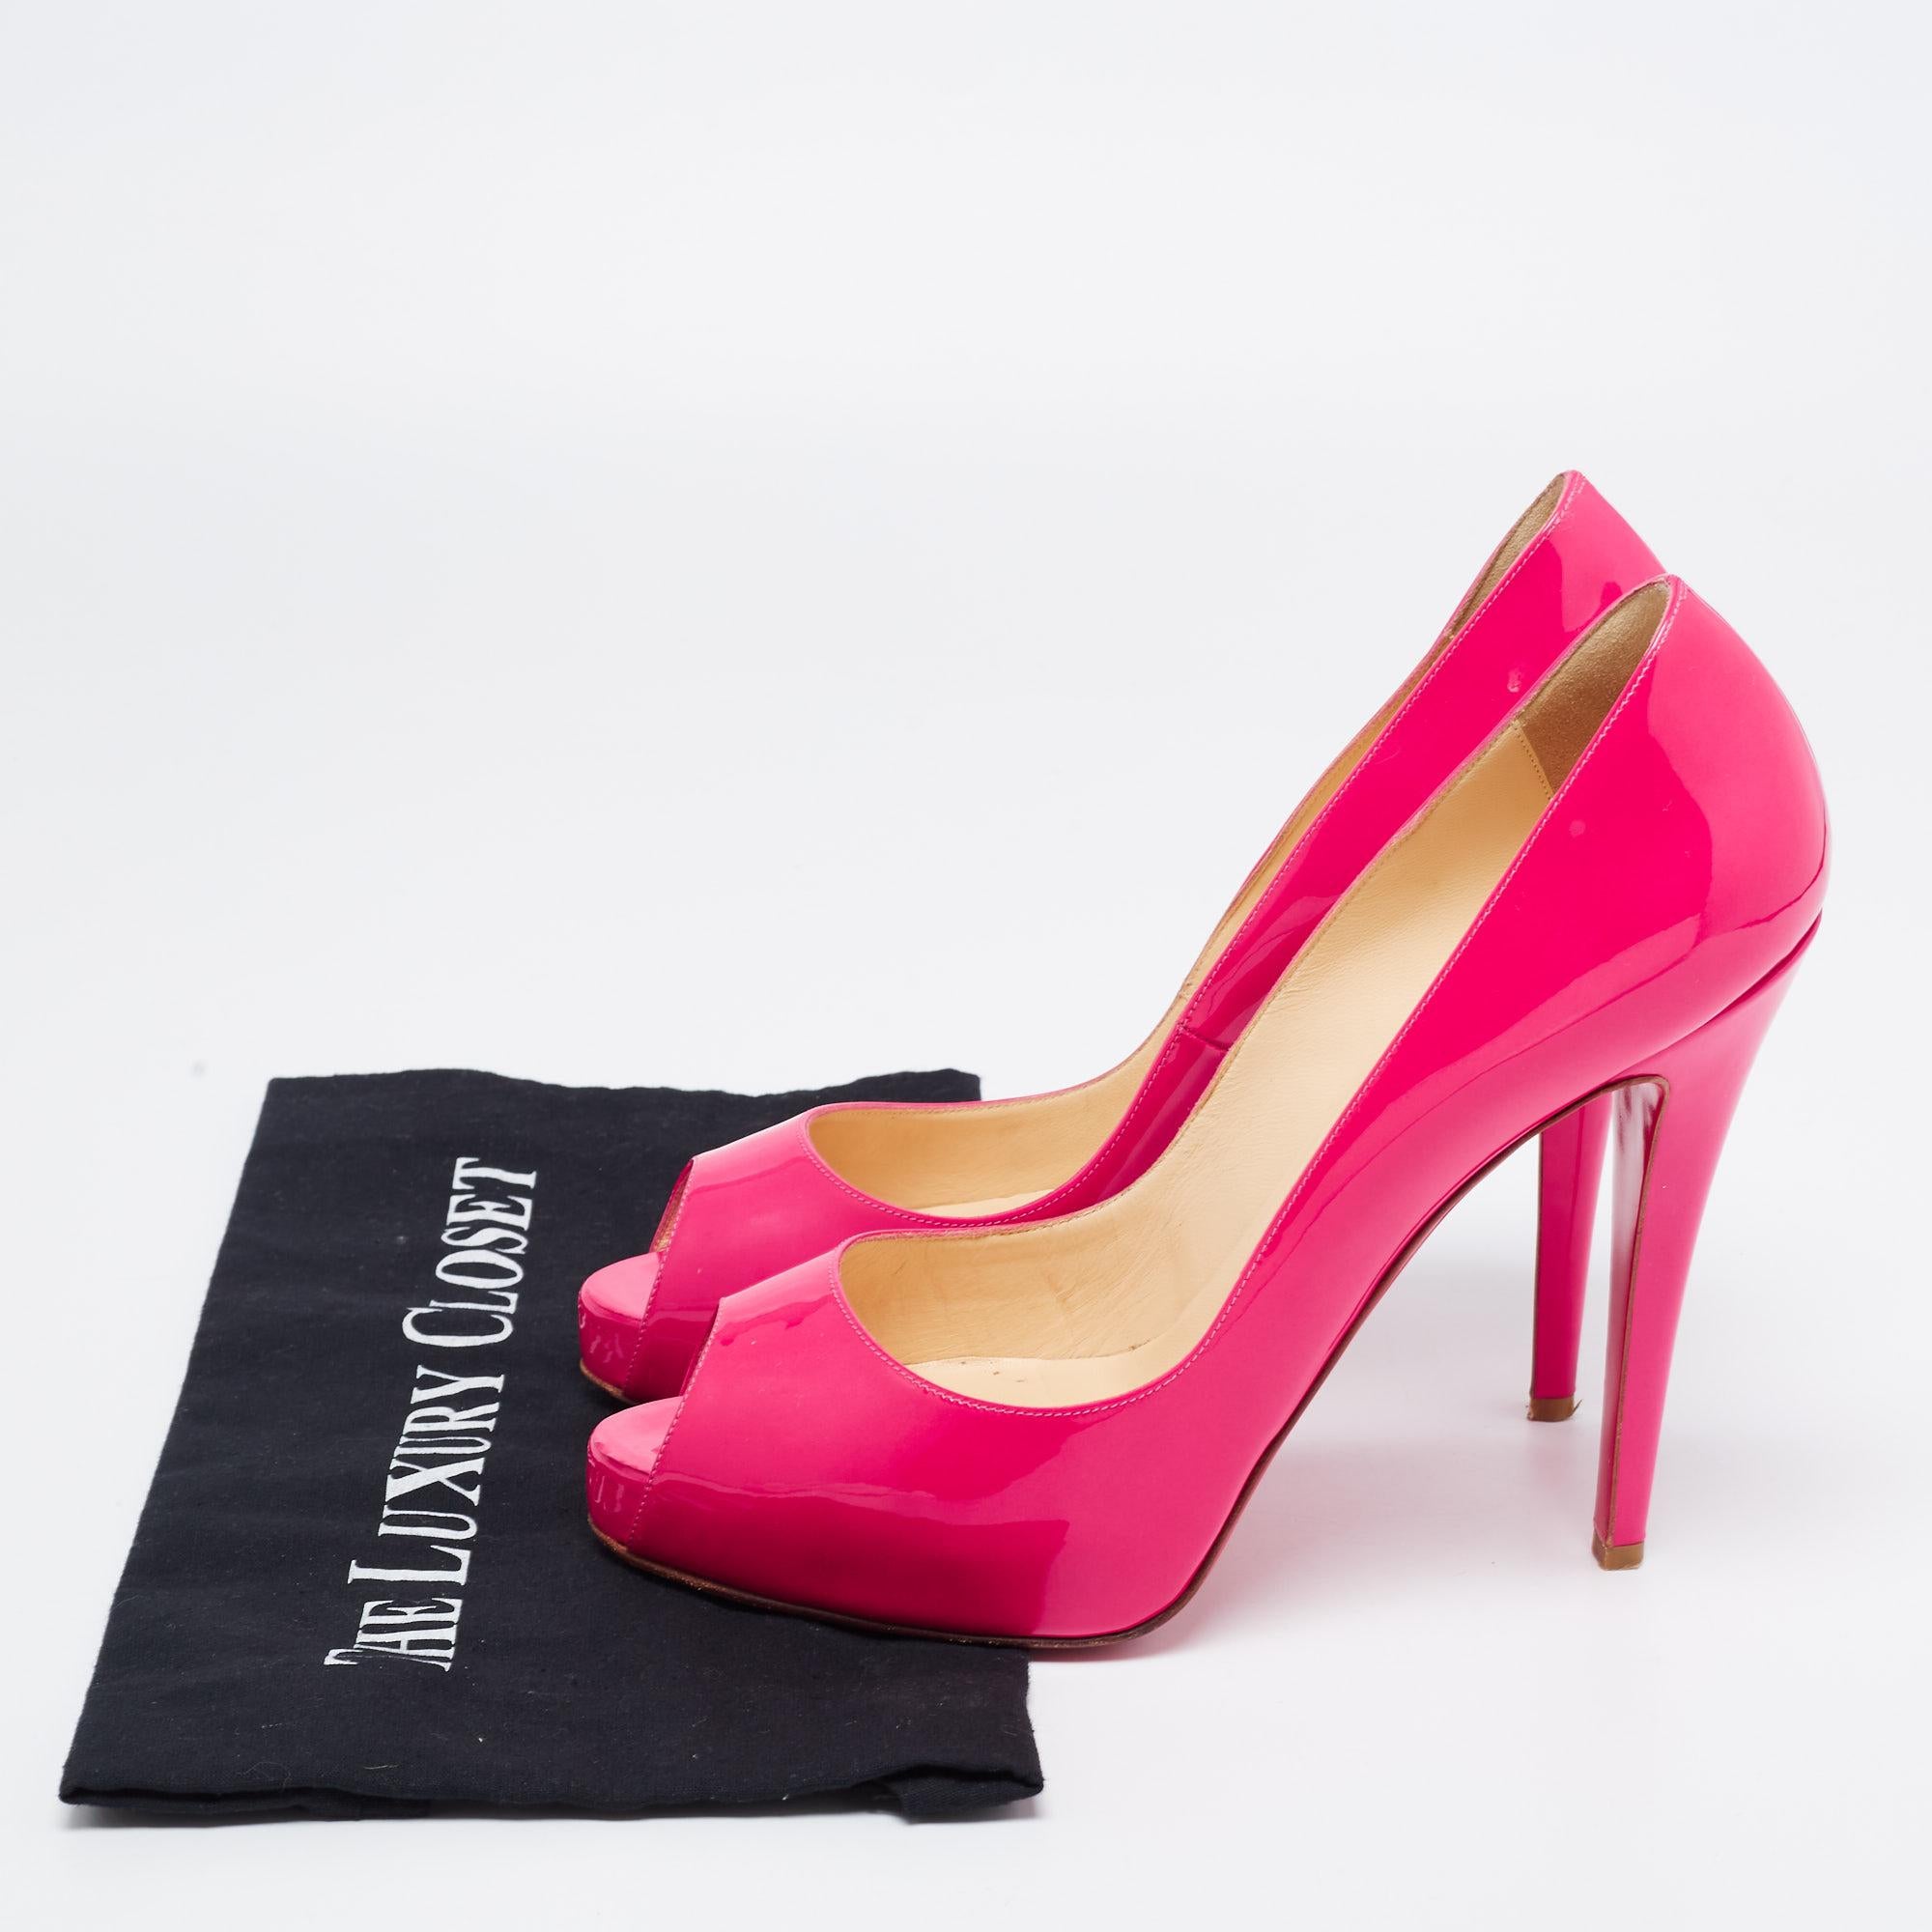 Christian Louboutin Pink Patent Leather New Very Prive Pumps Size 41 For Sale 3